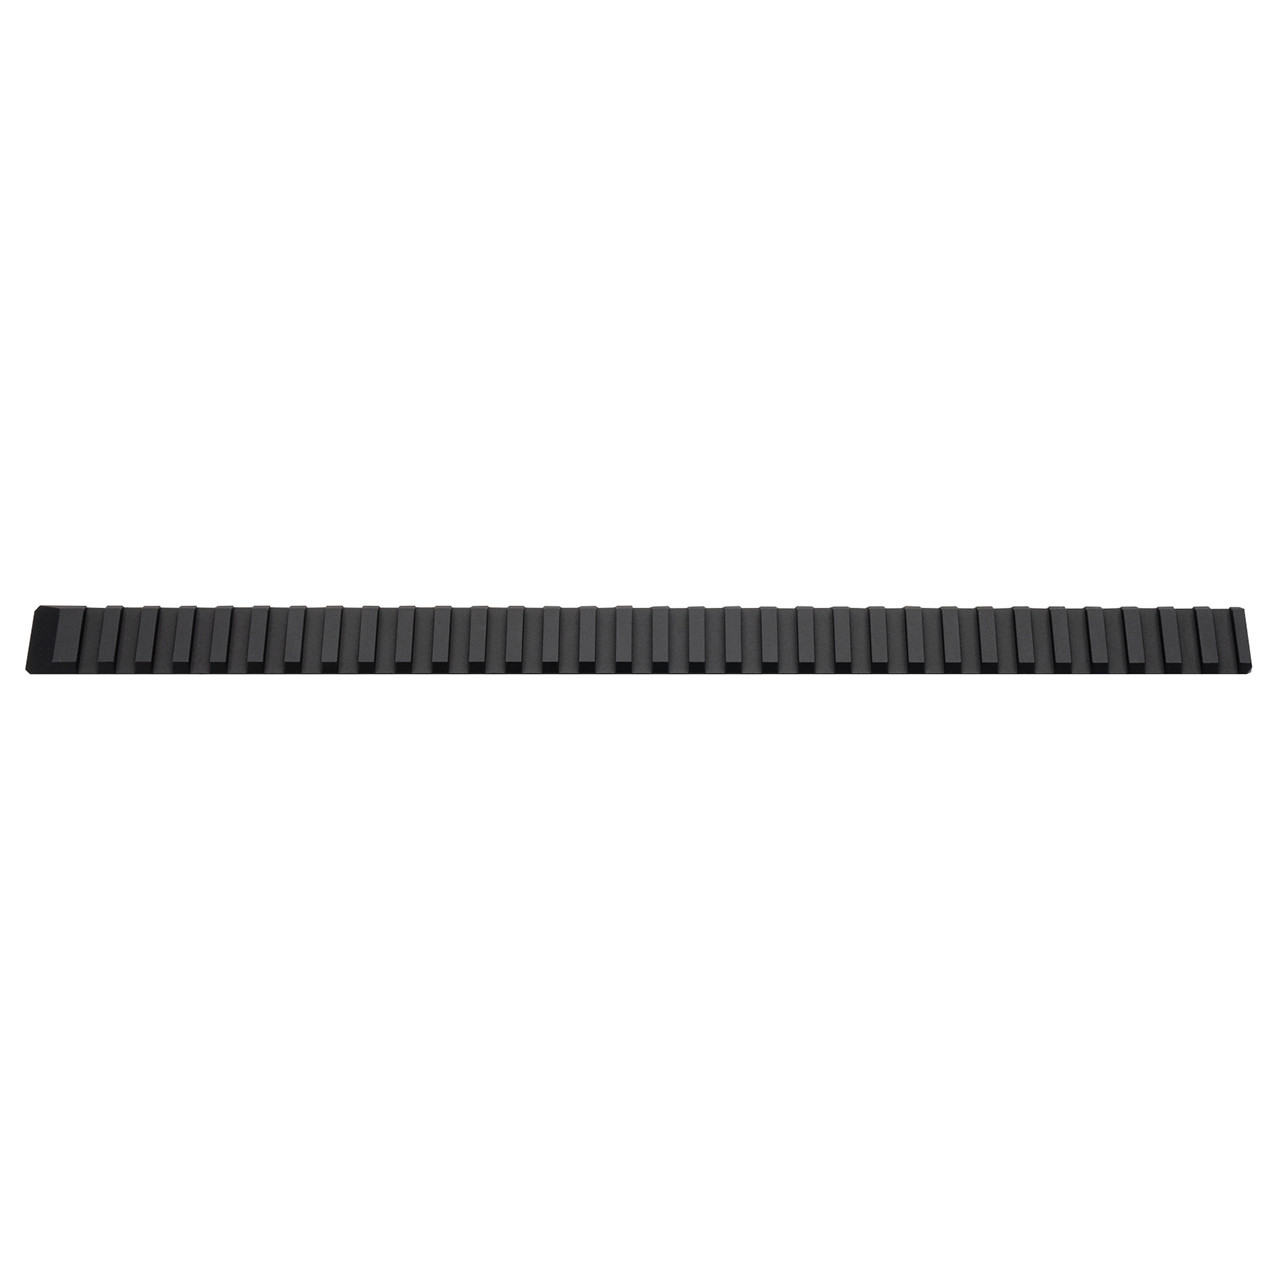 Shop KRISS Vector Top Rail - $ 18 - Krytac.com | For Airsoft Use Only.